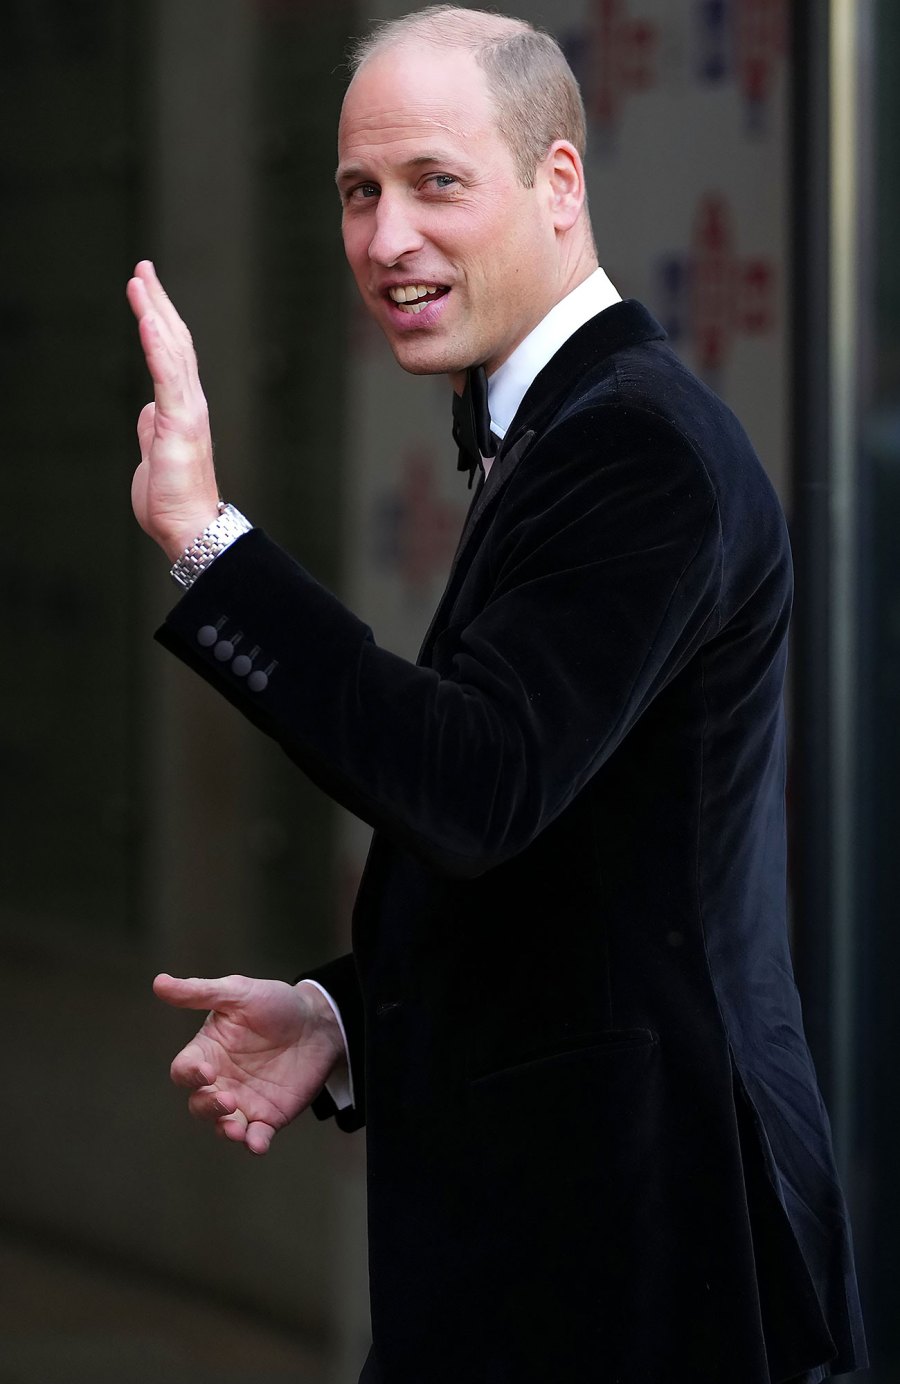 Prince William Steps Out in Style for London's Who Cares Wins Awards